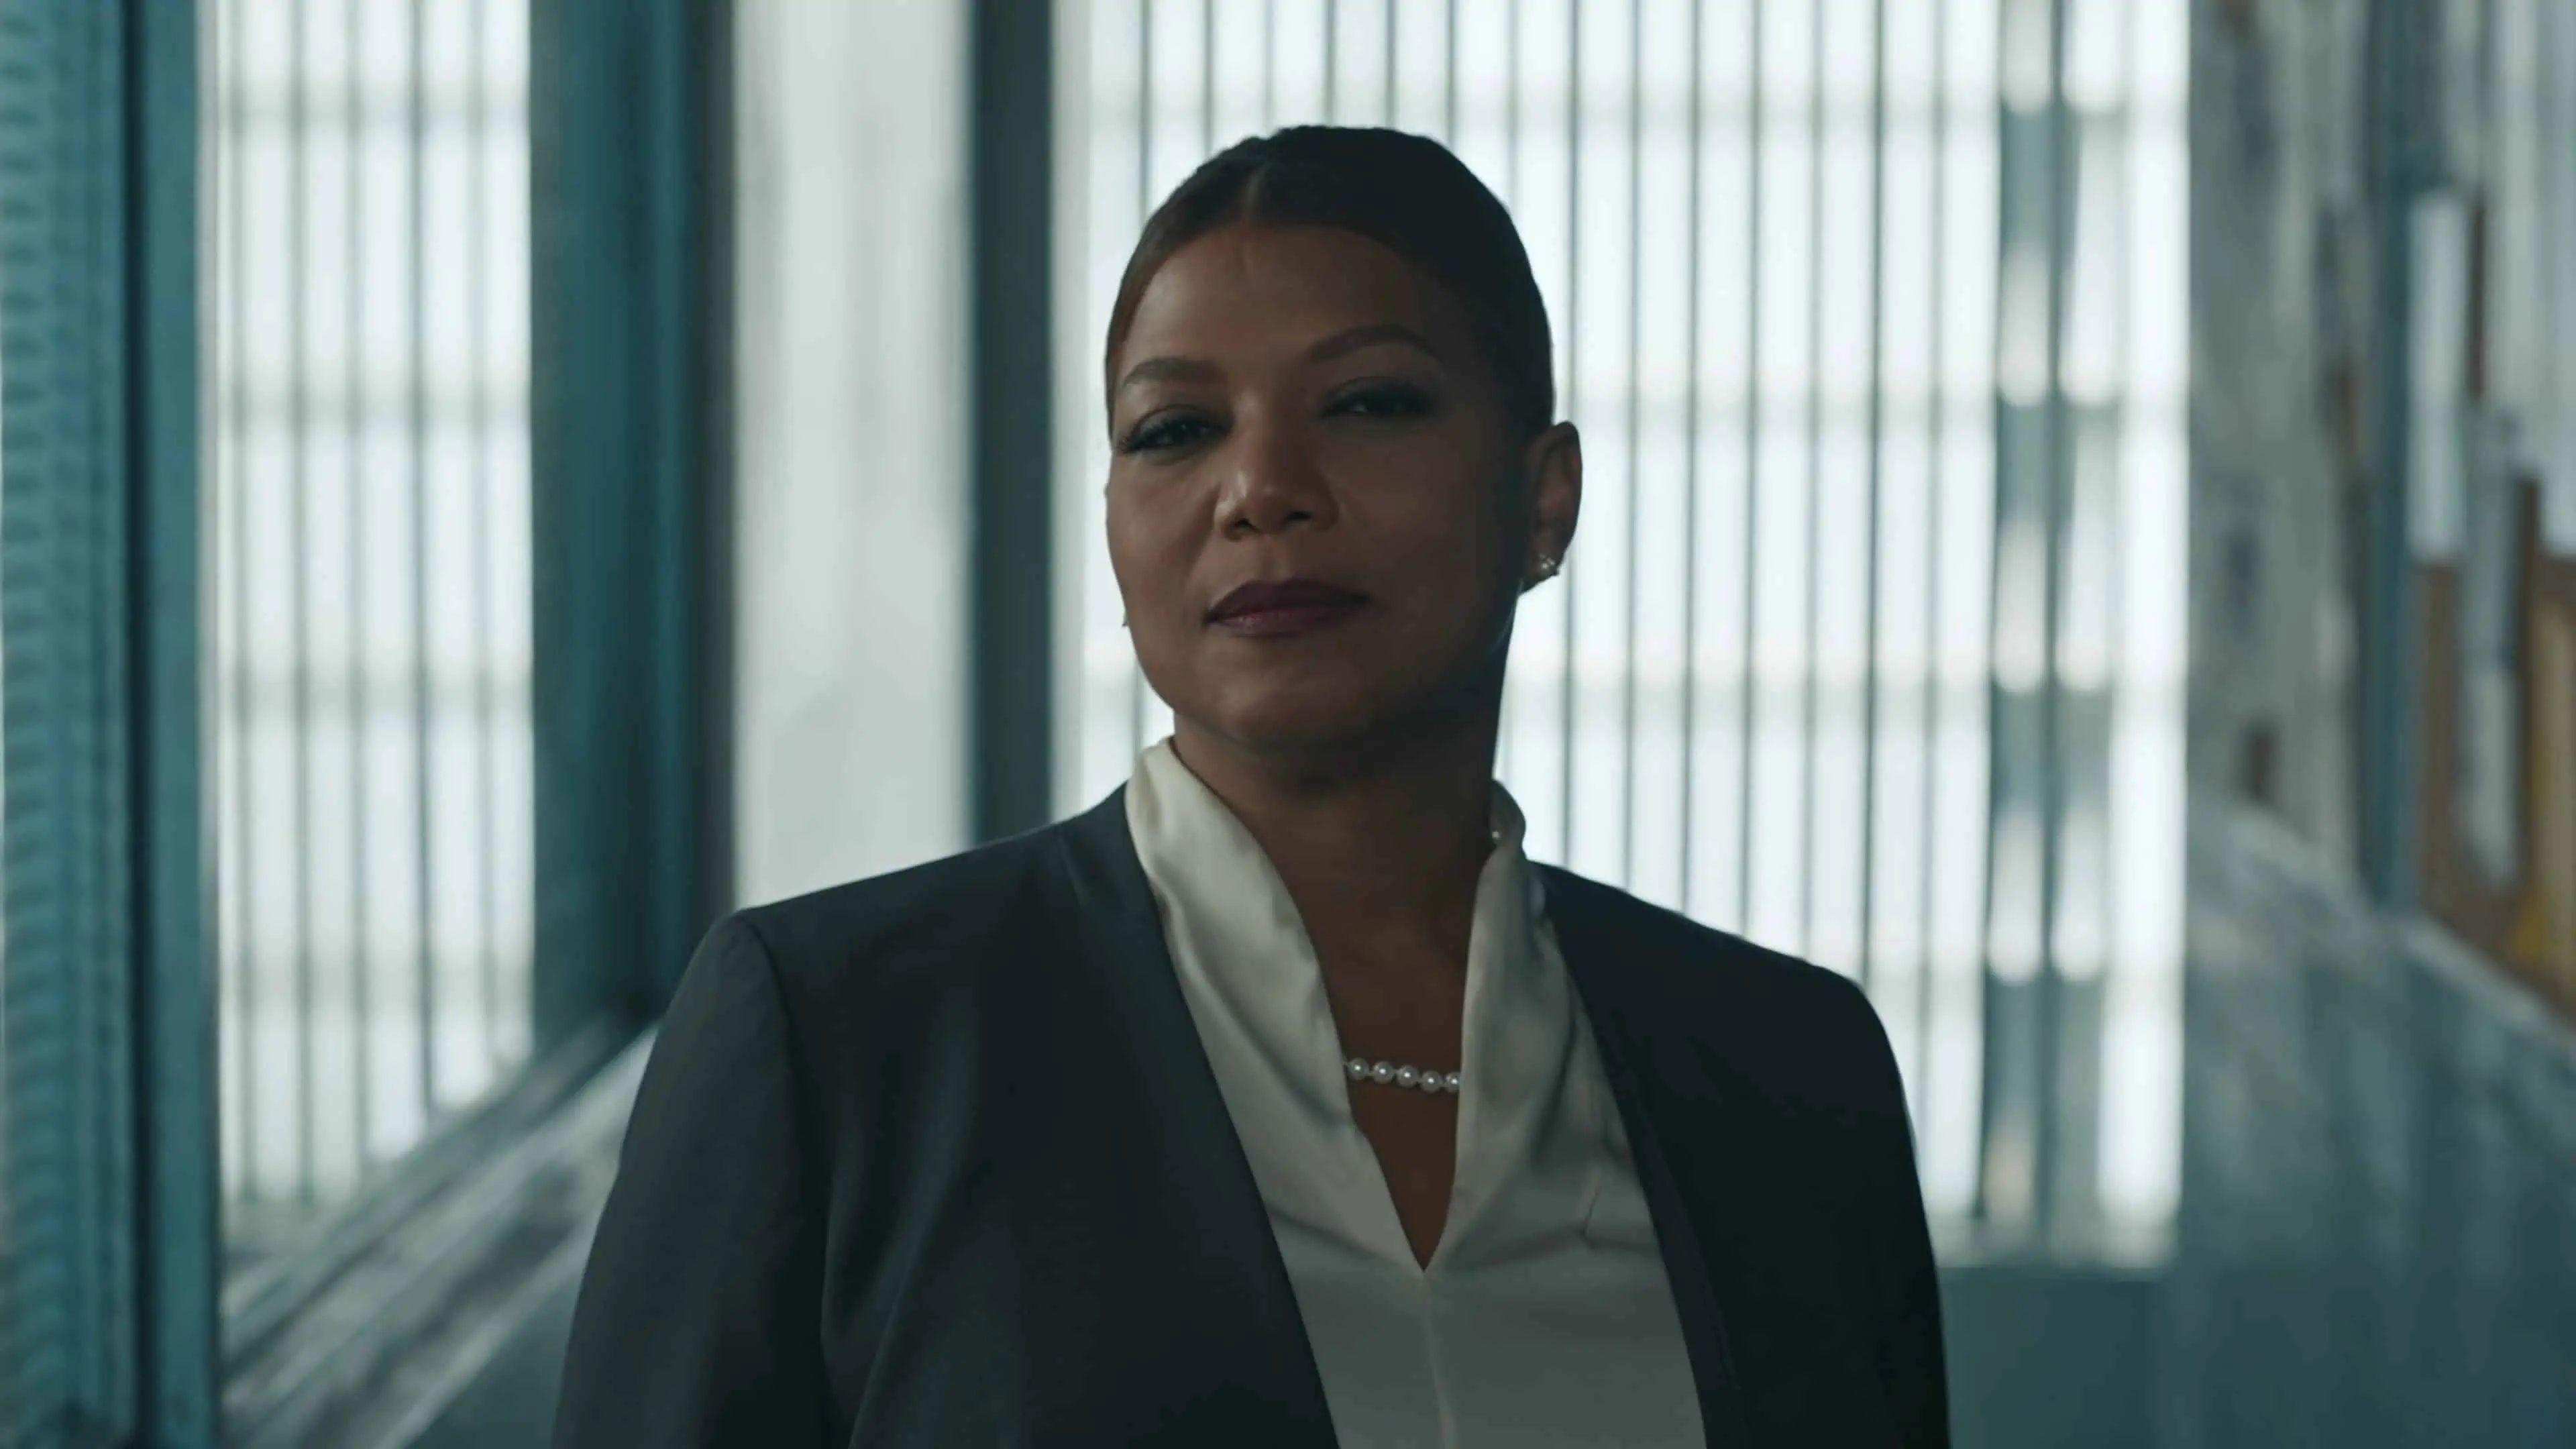 Robyn McCall (Queen Latifah) masquerading as a public defender